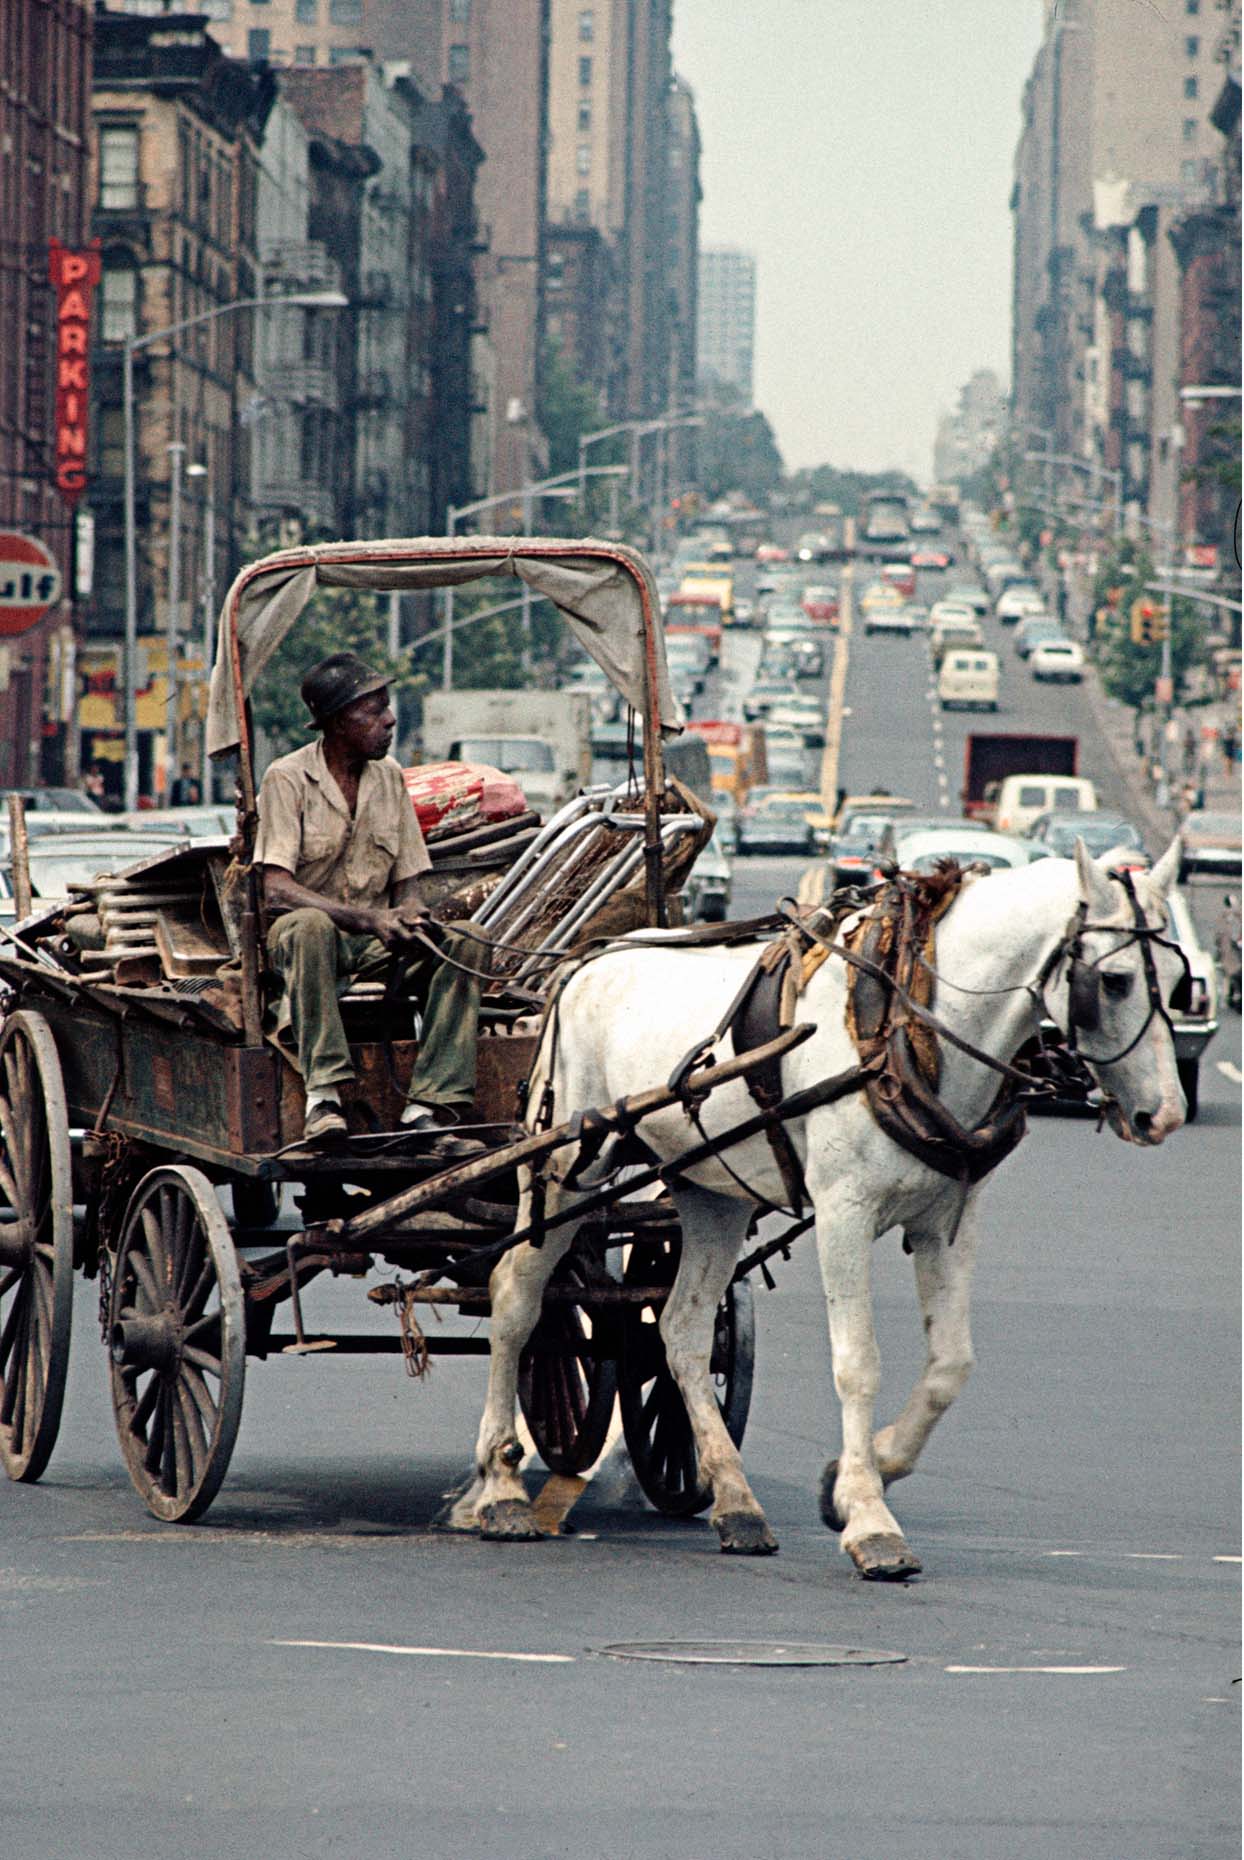 01_On the Way to Harlem, 1970_-DUP15